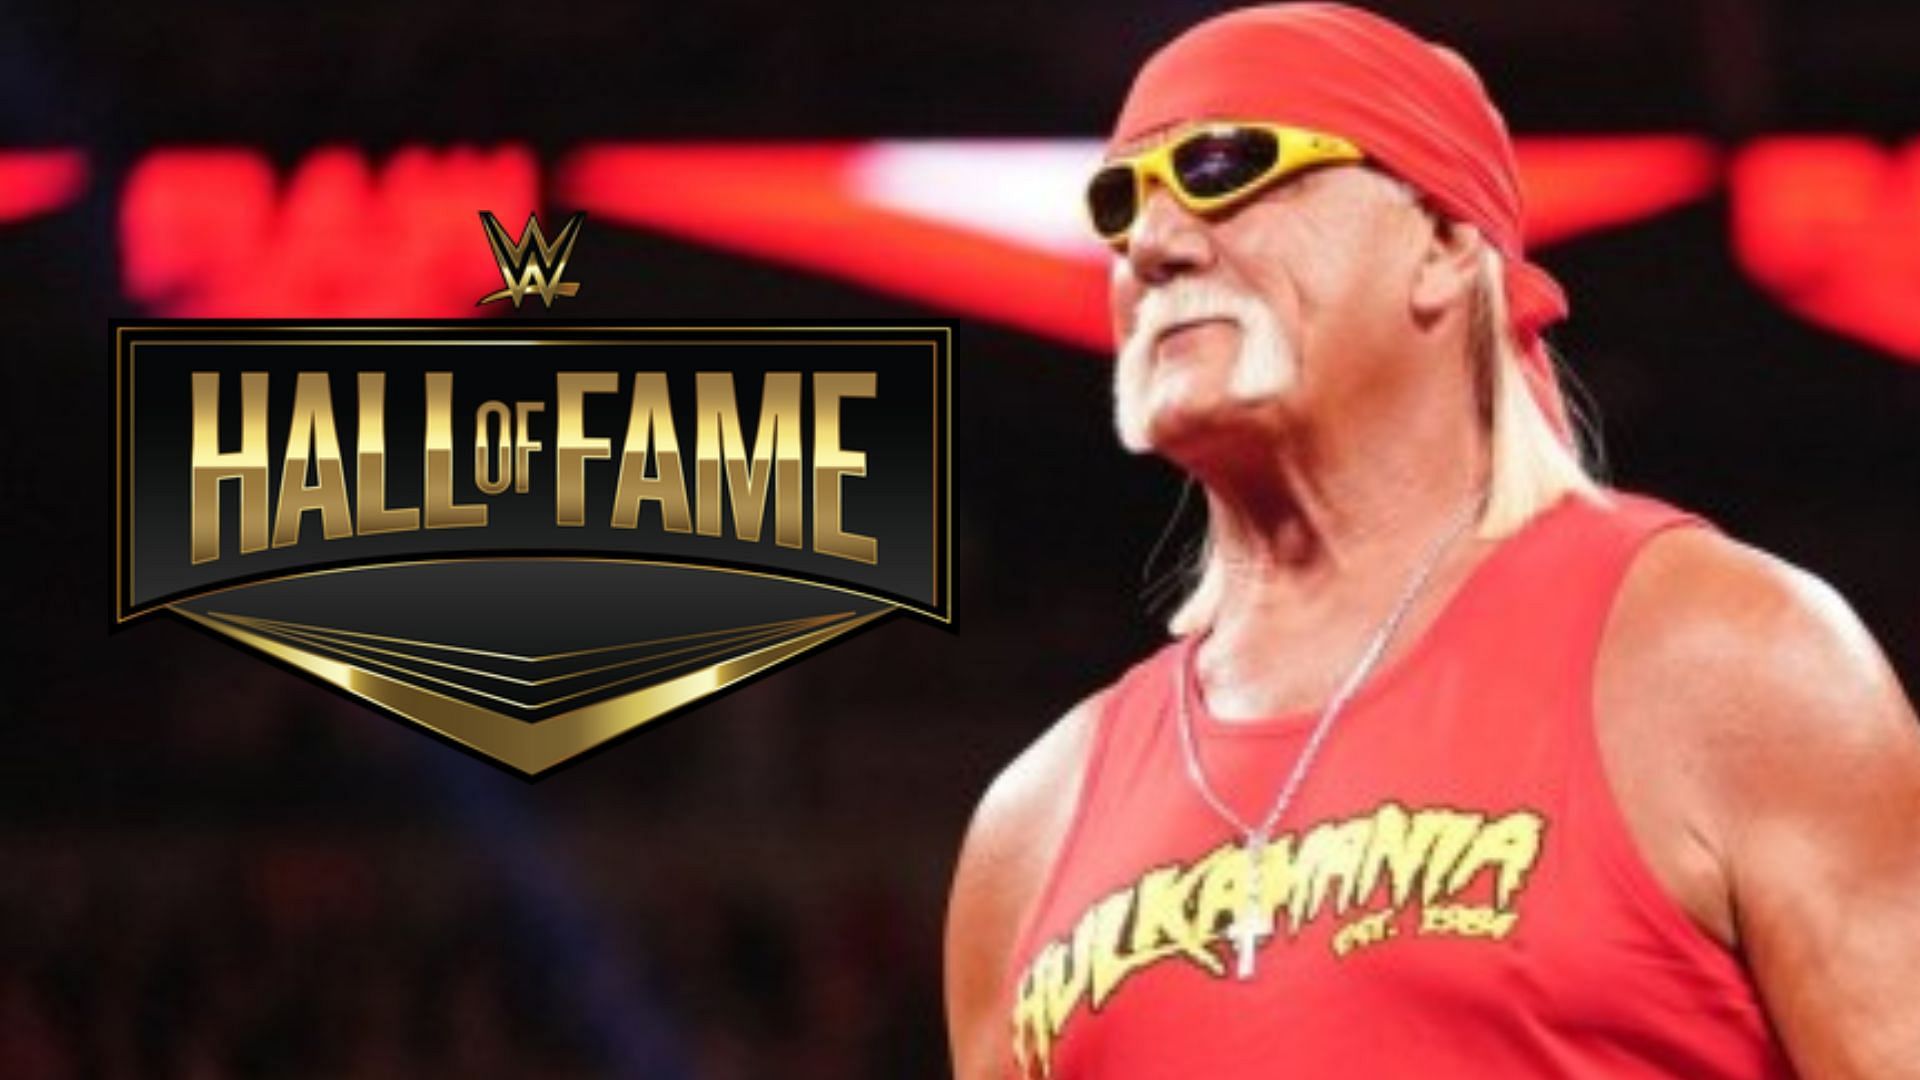 What was it like being in the ring with a prime Hulk Hogan?